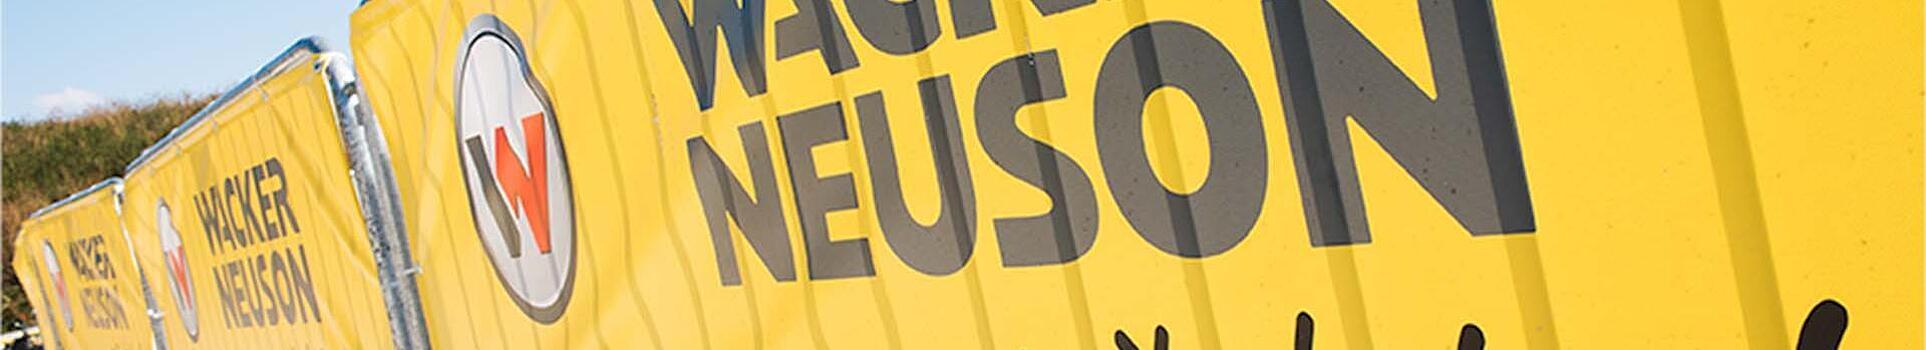 Banner with Wacker Neuson logo, lettering and claim.